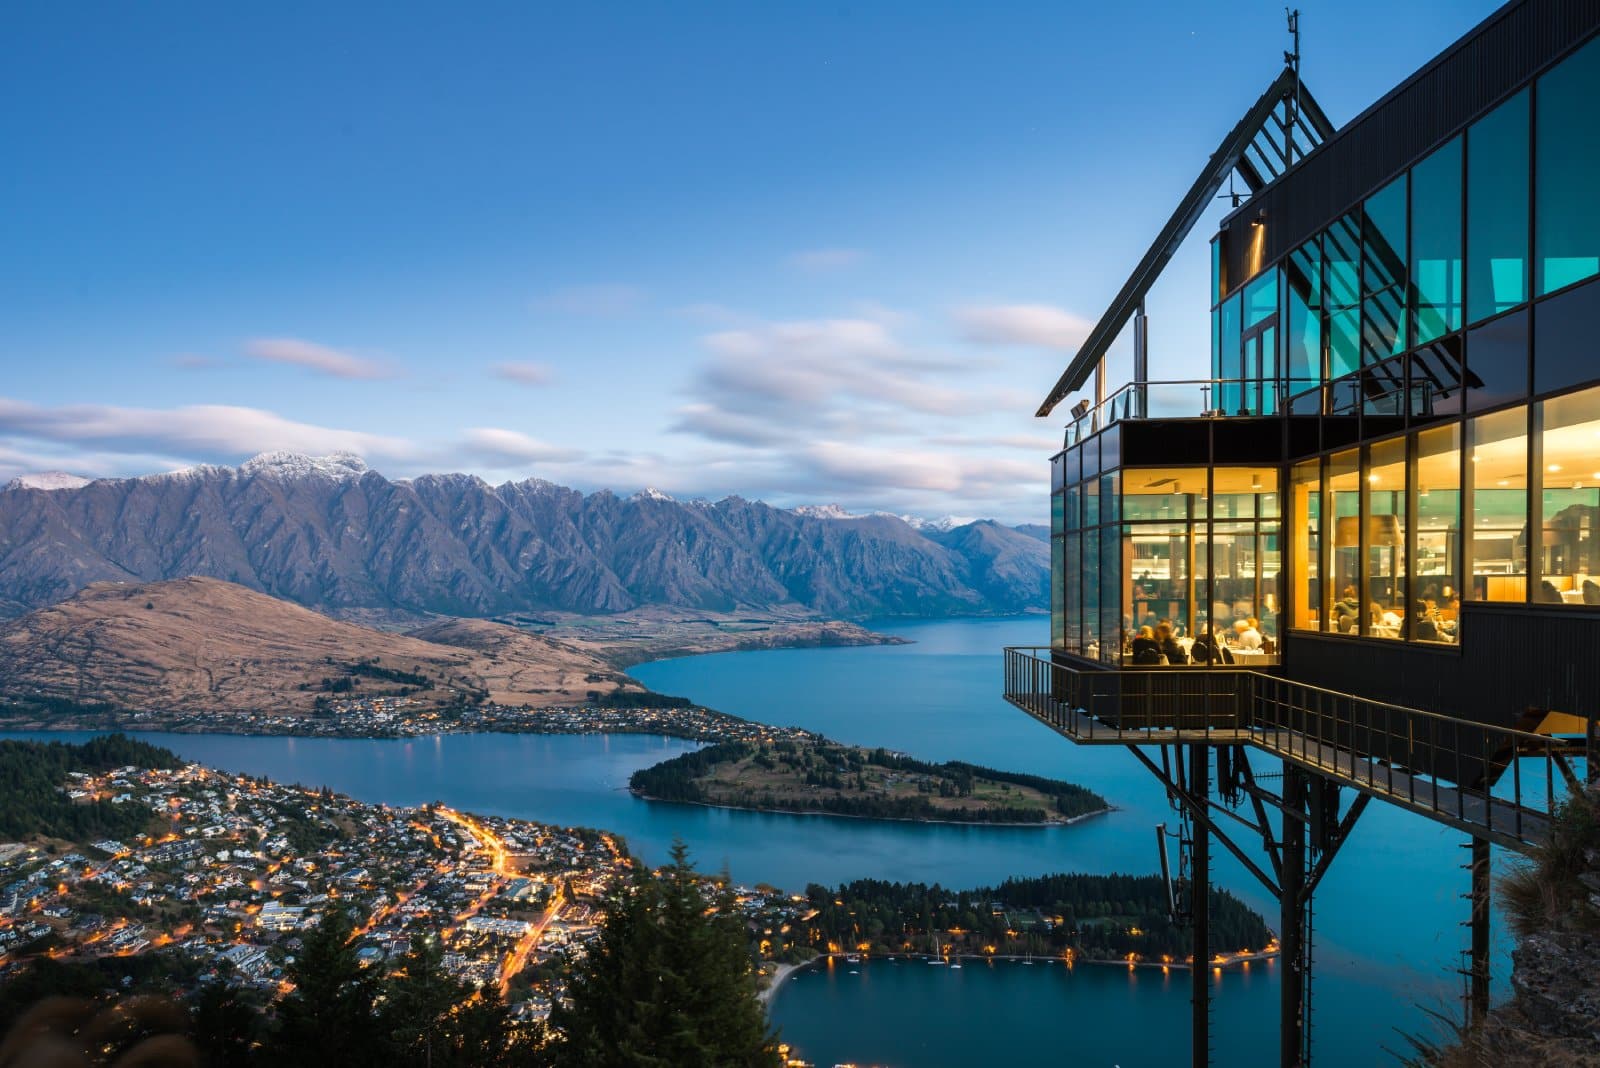 <p><span>Queenstown, located on New Zealand’s picturesque South Island, is an adventure capital that caters to families who love the outdoors. Activities range from gentle scenic boat rides on Lake Wakatipu to adrenaline-pumping bungee jumping for the more adventurous.</span></p> <p><span>The region’s stunning natural scenery, majestic mountains, and crystal-clear lakes are perfect for family hikes and picnics. Queenstown also offers bike trails that are suitable for all ages through breathtaking landscapes.</span></p> <p><span>With its friendly atmosphere and range of dining options, Queenstown is a great base for exploring the surrounding areas. It is also an ideal destination for families seeking adventure and natural beauty.</span></p> <p><b>Insider’s Tip: </b><span>Take a family-friendly bike tour around Lake Wakatipu. </span></p> <p><b>When To Travel: </b><span>Summer for outdoor activities and winter for snow sports. </span></p> <p><b>How To Get There: </b><span>Fly into Queenstown Airport, which is accessible from major cities in New Zealand and Australia.</span></p>